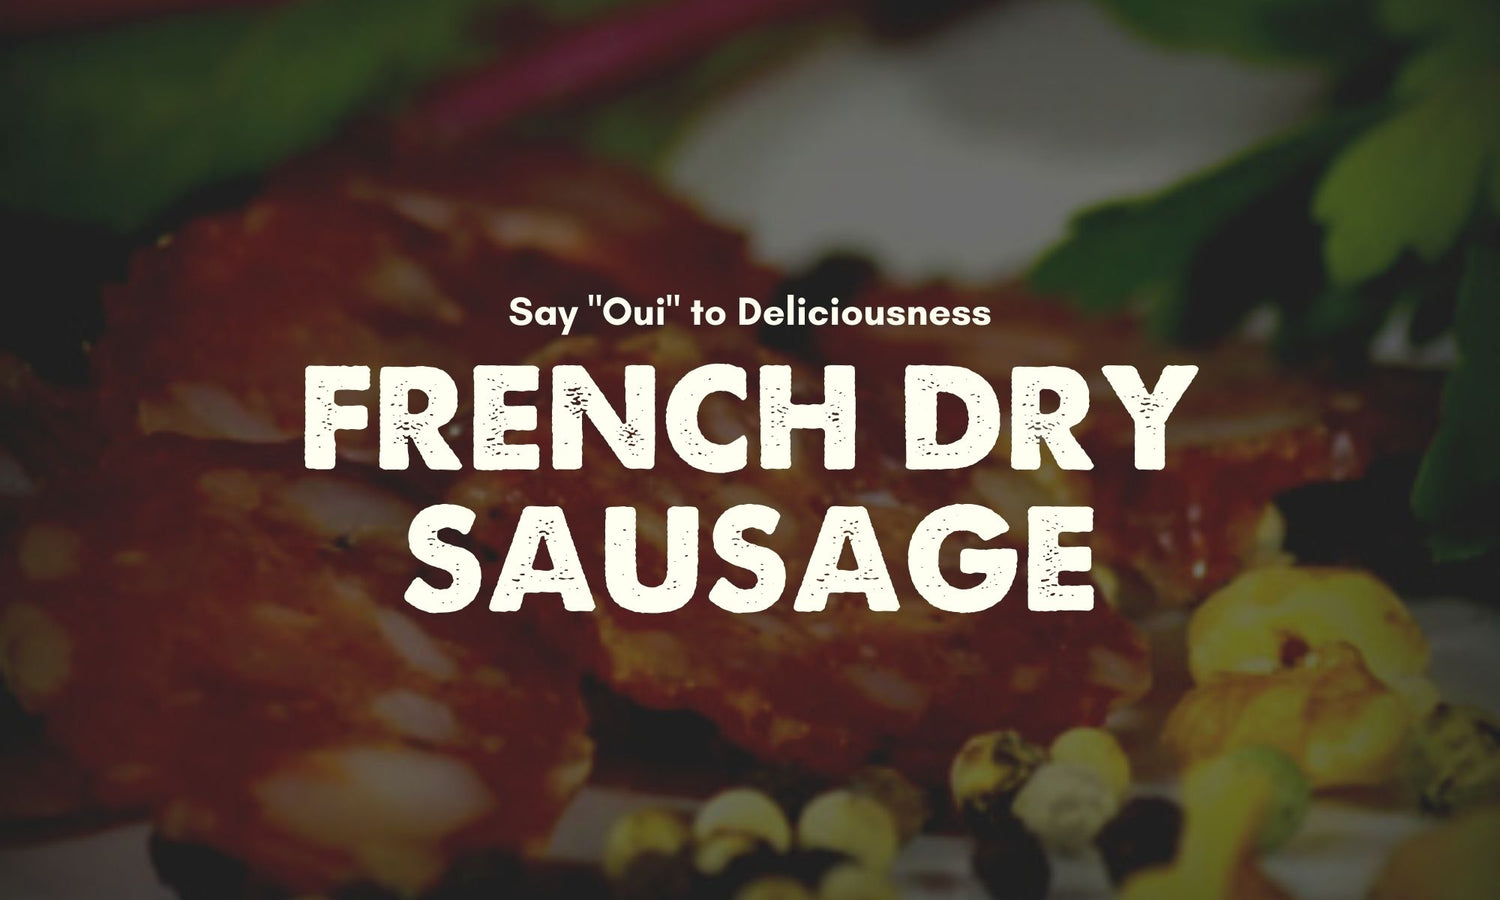 French-style Dry Sausage or Saucisson Sec